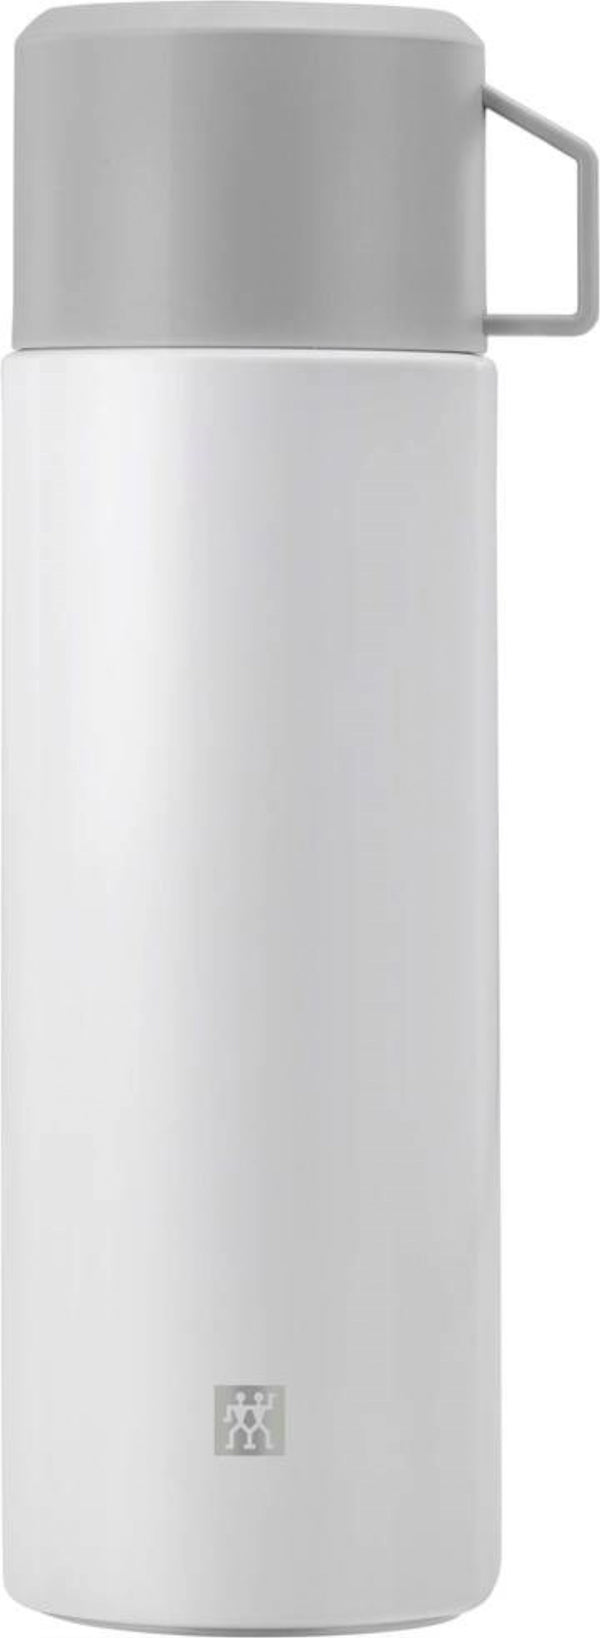 Zwilling Kitchen Thermo Vacuum Bottle 1,000 ml, silver-white Z39500-513-0